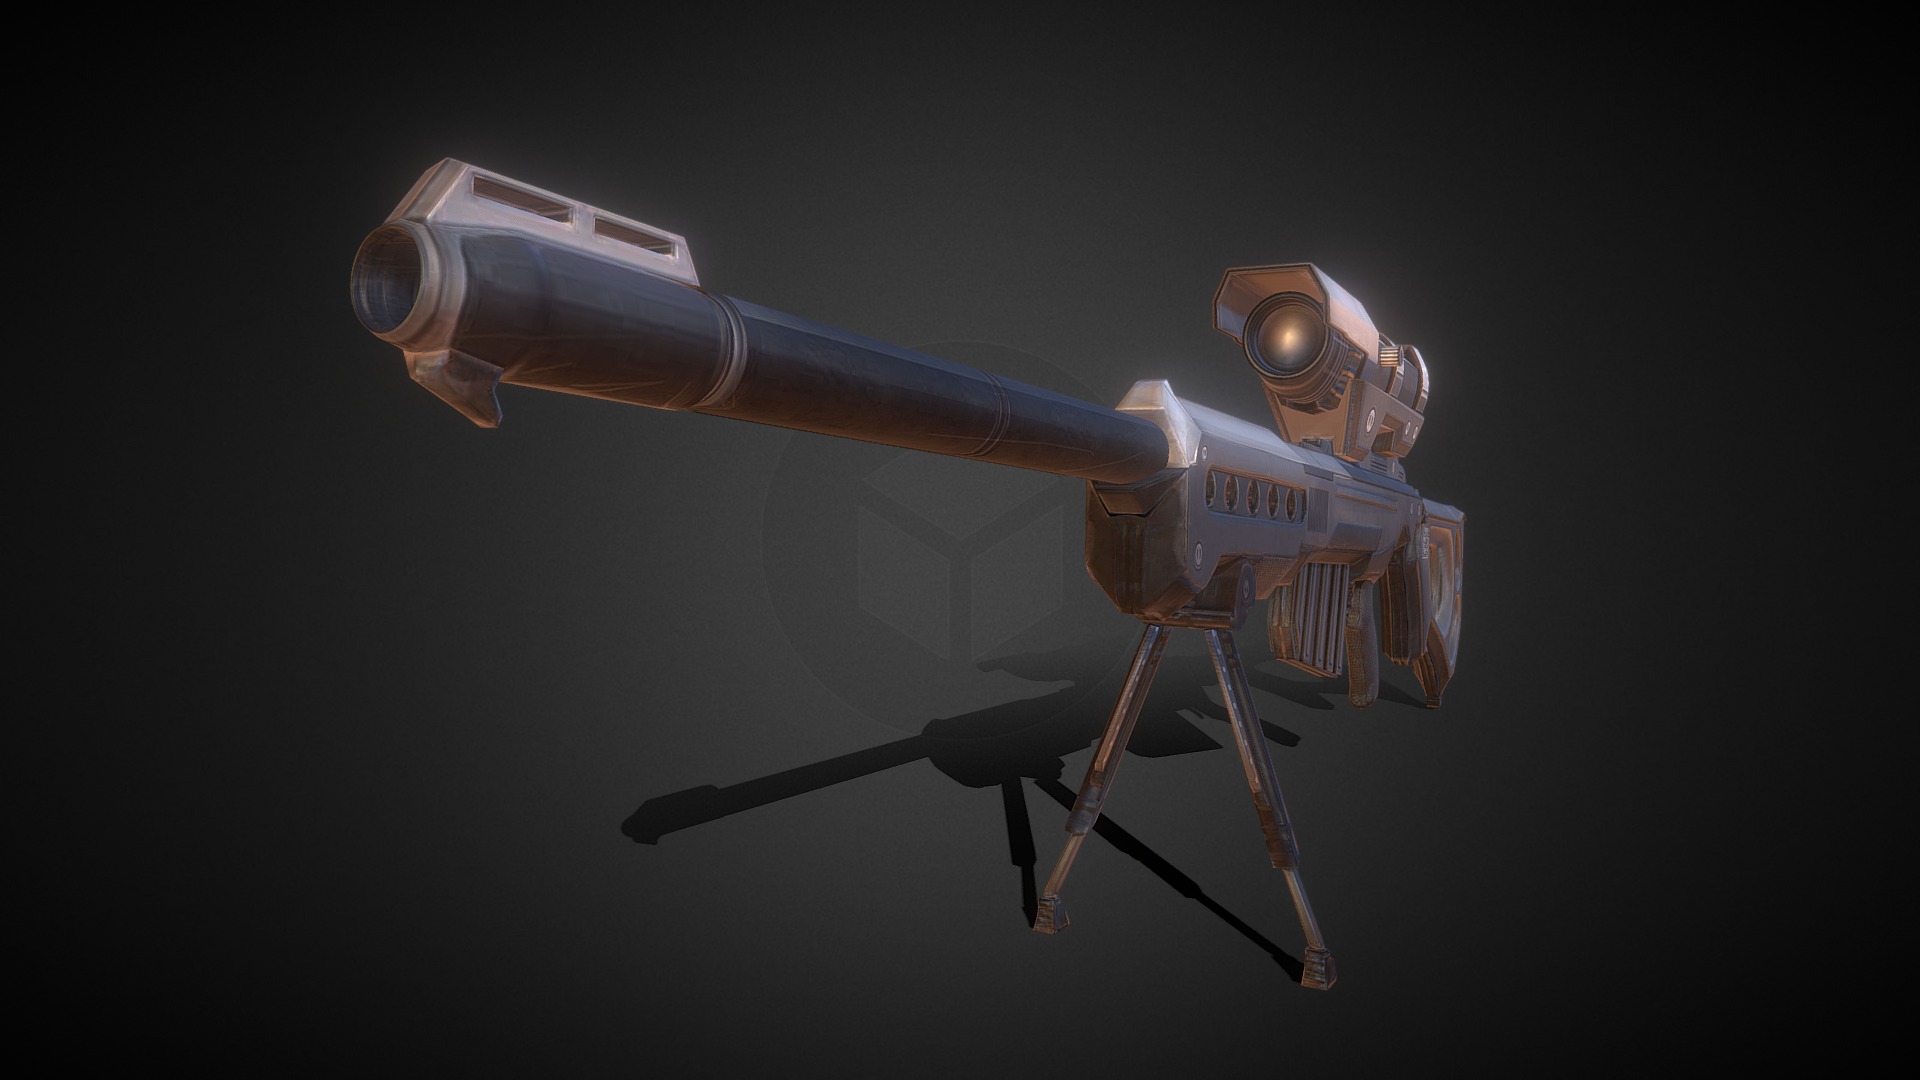 Sniper rifle Concept by St-Pete

http://st-pete.deviantart.com/art/sniper-rifle-KSR-29-311021433 - KSR 29 Sniper - Download Free 3D model by 3DHaupt (@dennish2010) 3d model